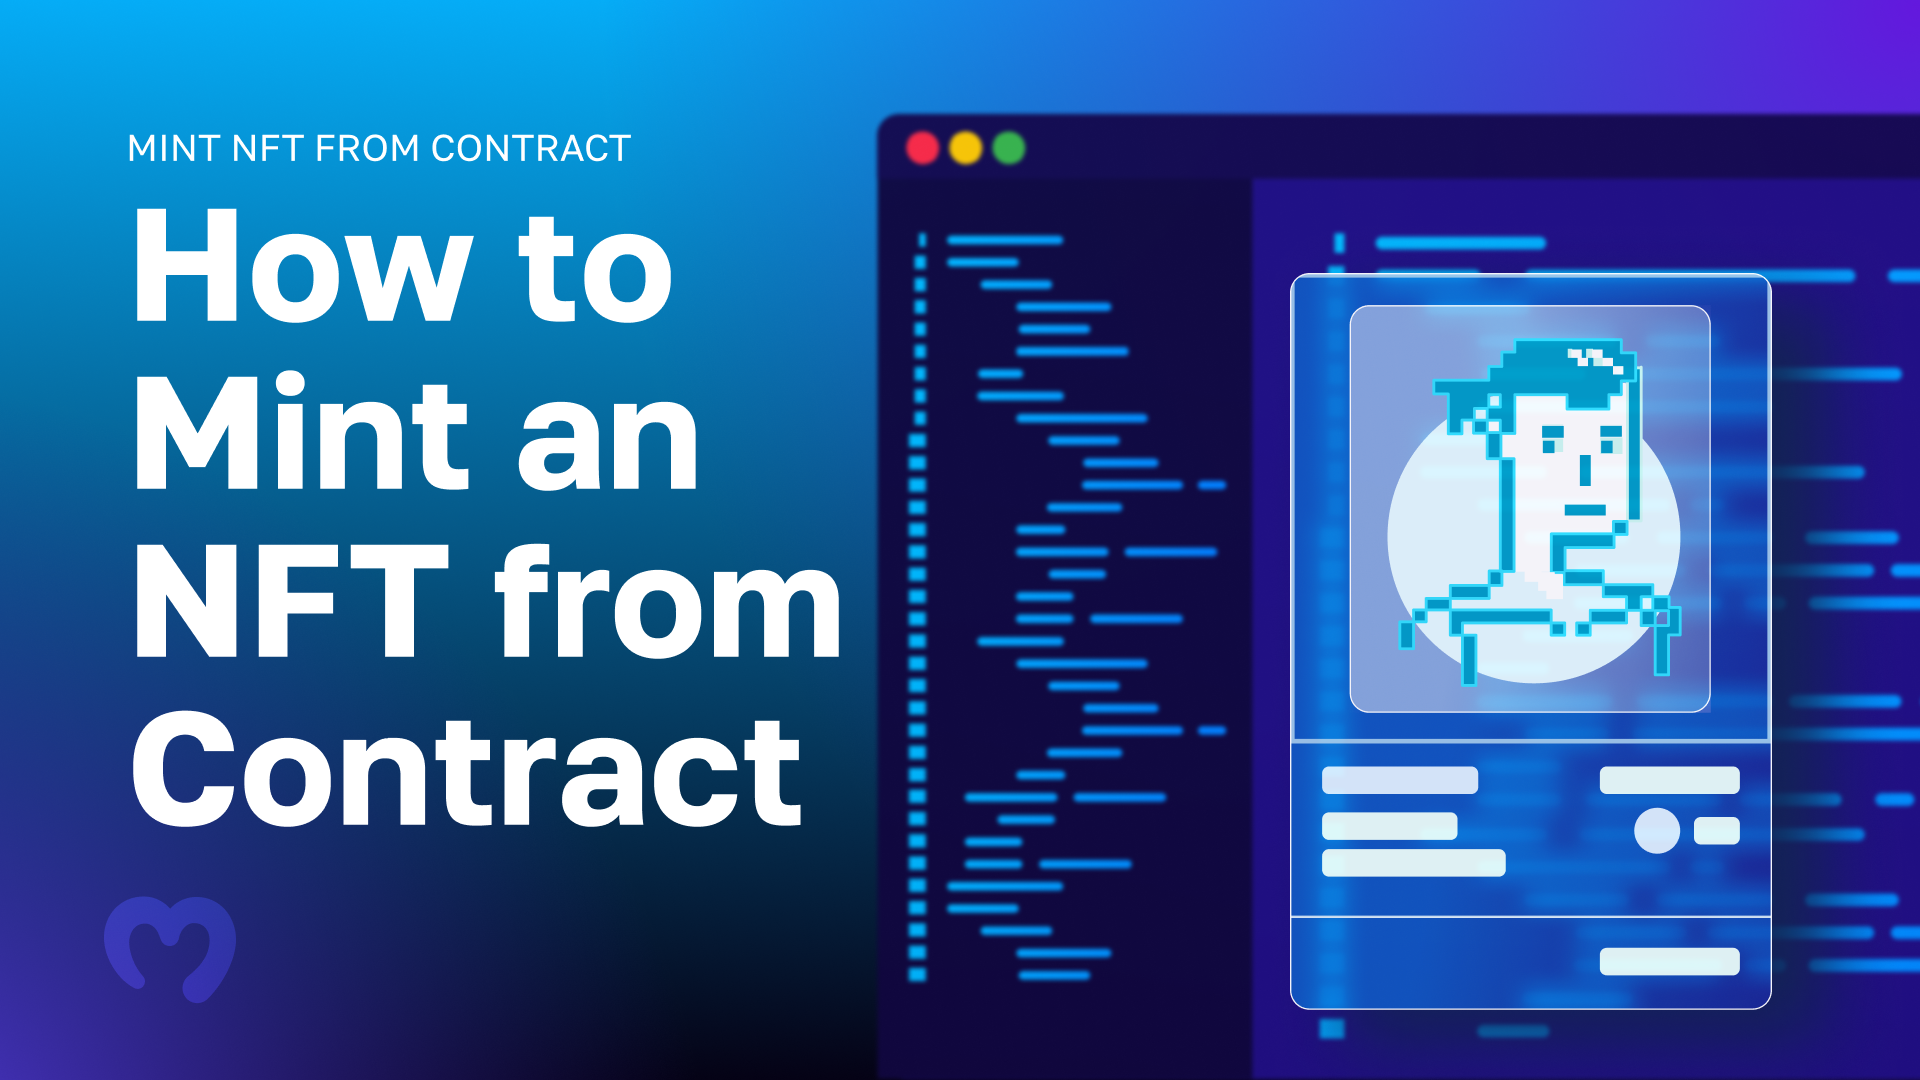 Mint NFT from Contract - How to Mint an NFT from Contract